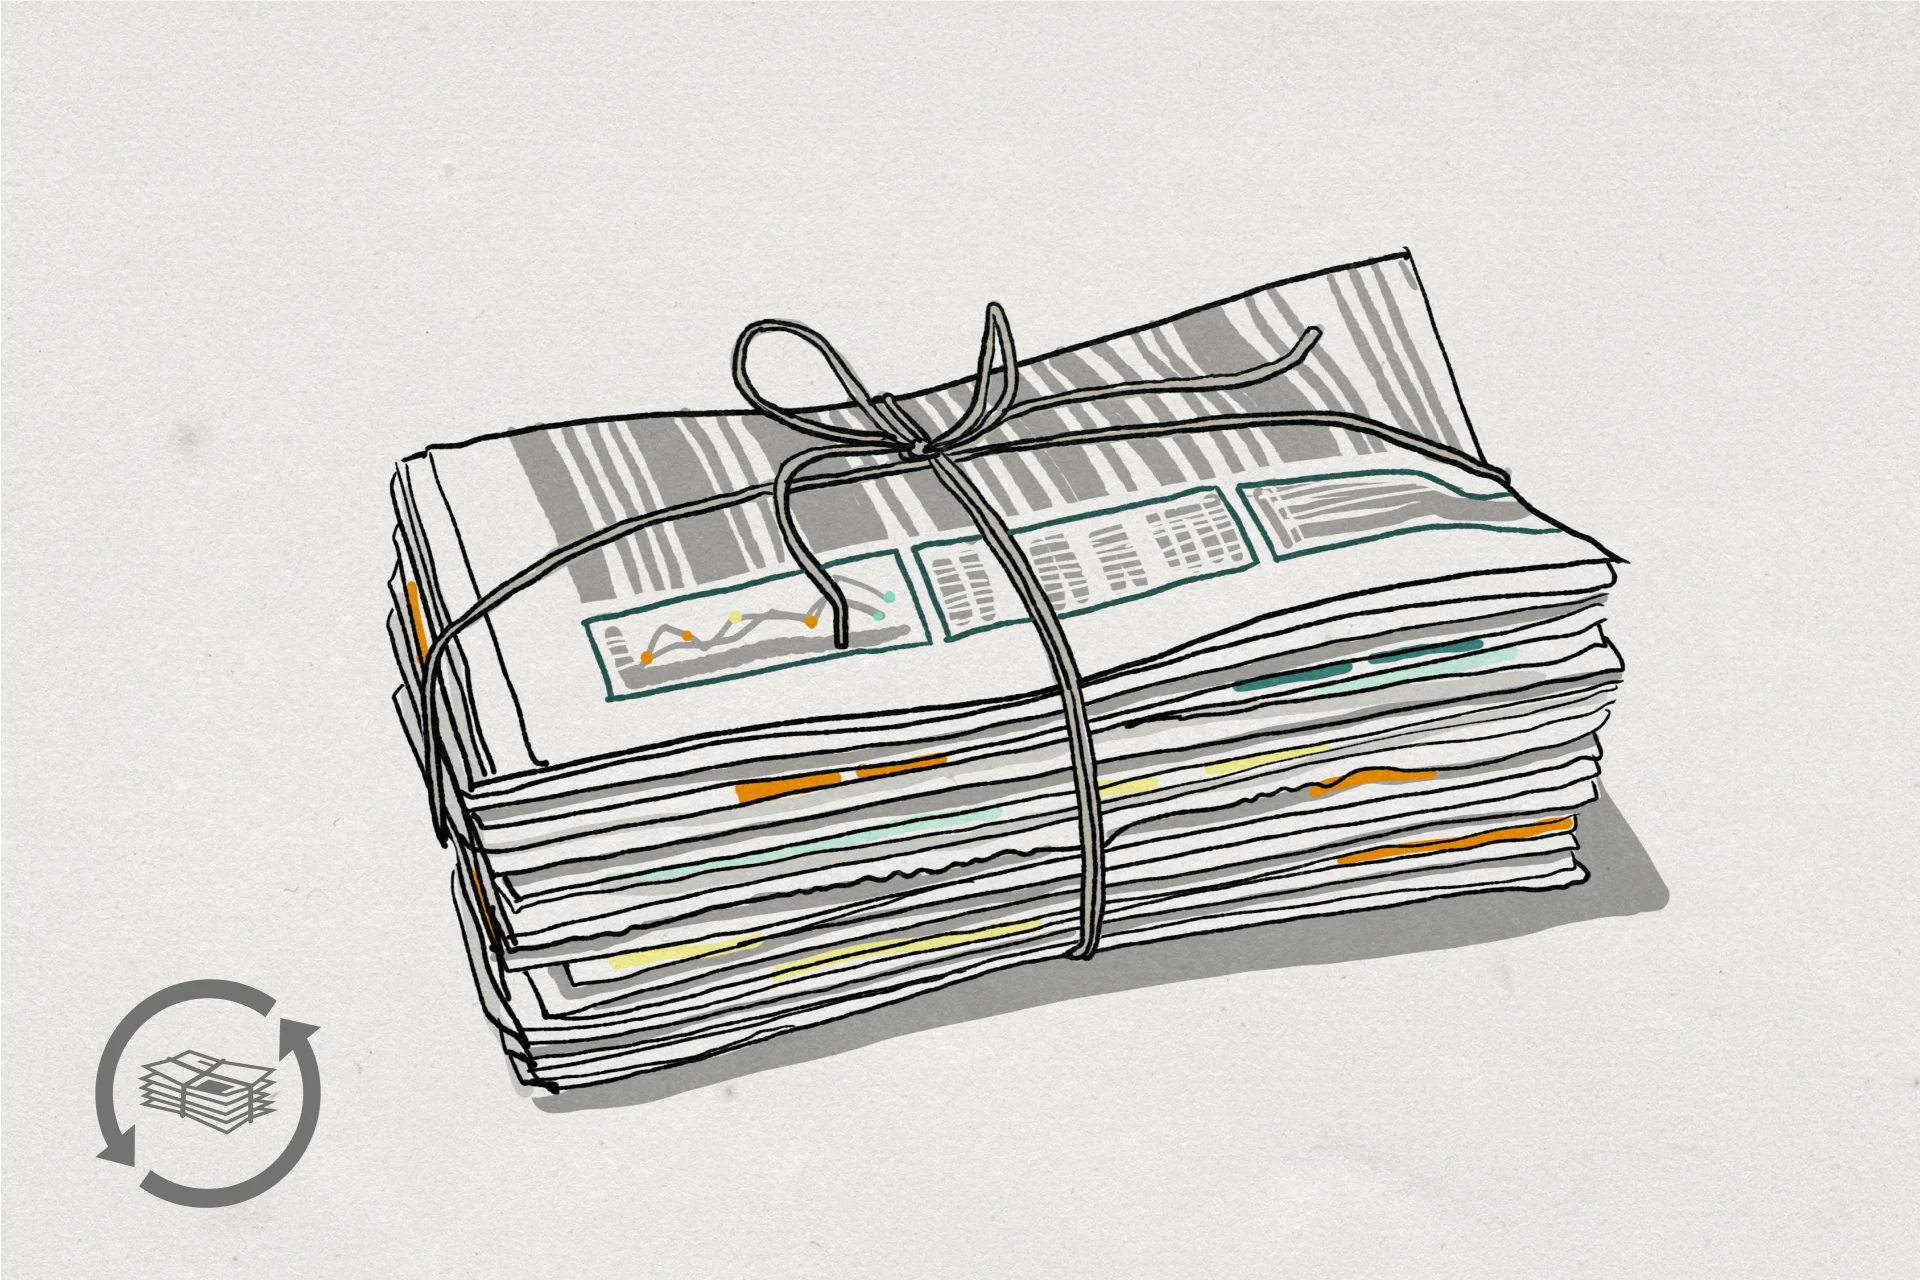 Illustration of a bundle of newspapers.